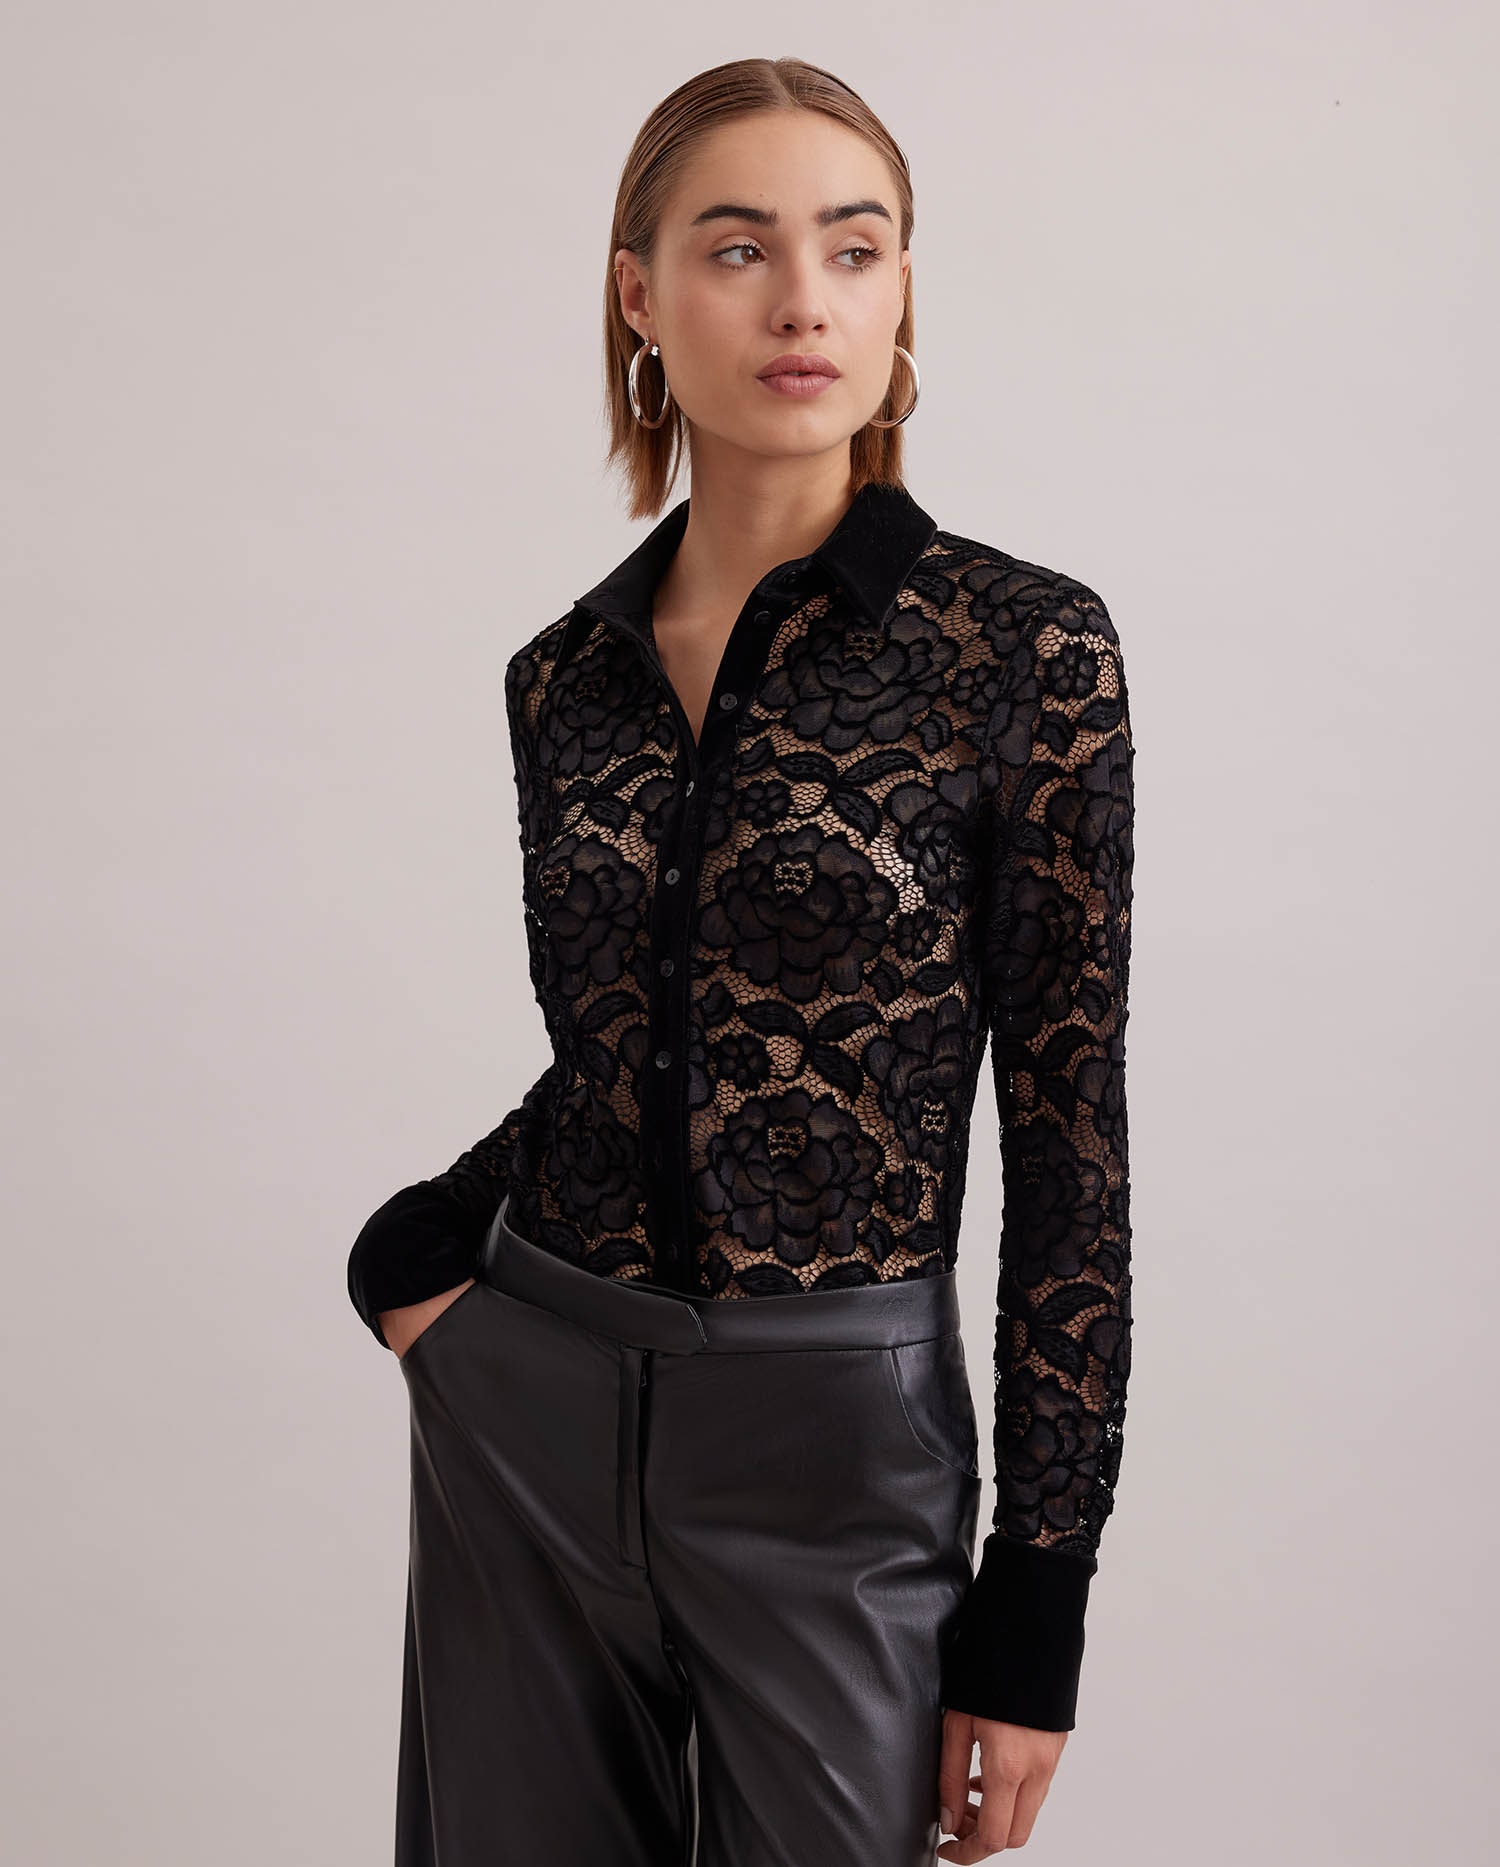 Discover The SALINGER Long sleeve black lace shirt with Velvet trim detail from ANNE FONTAINE